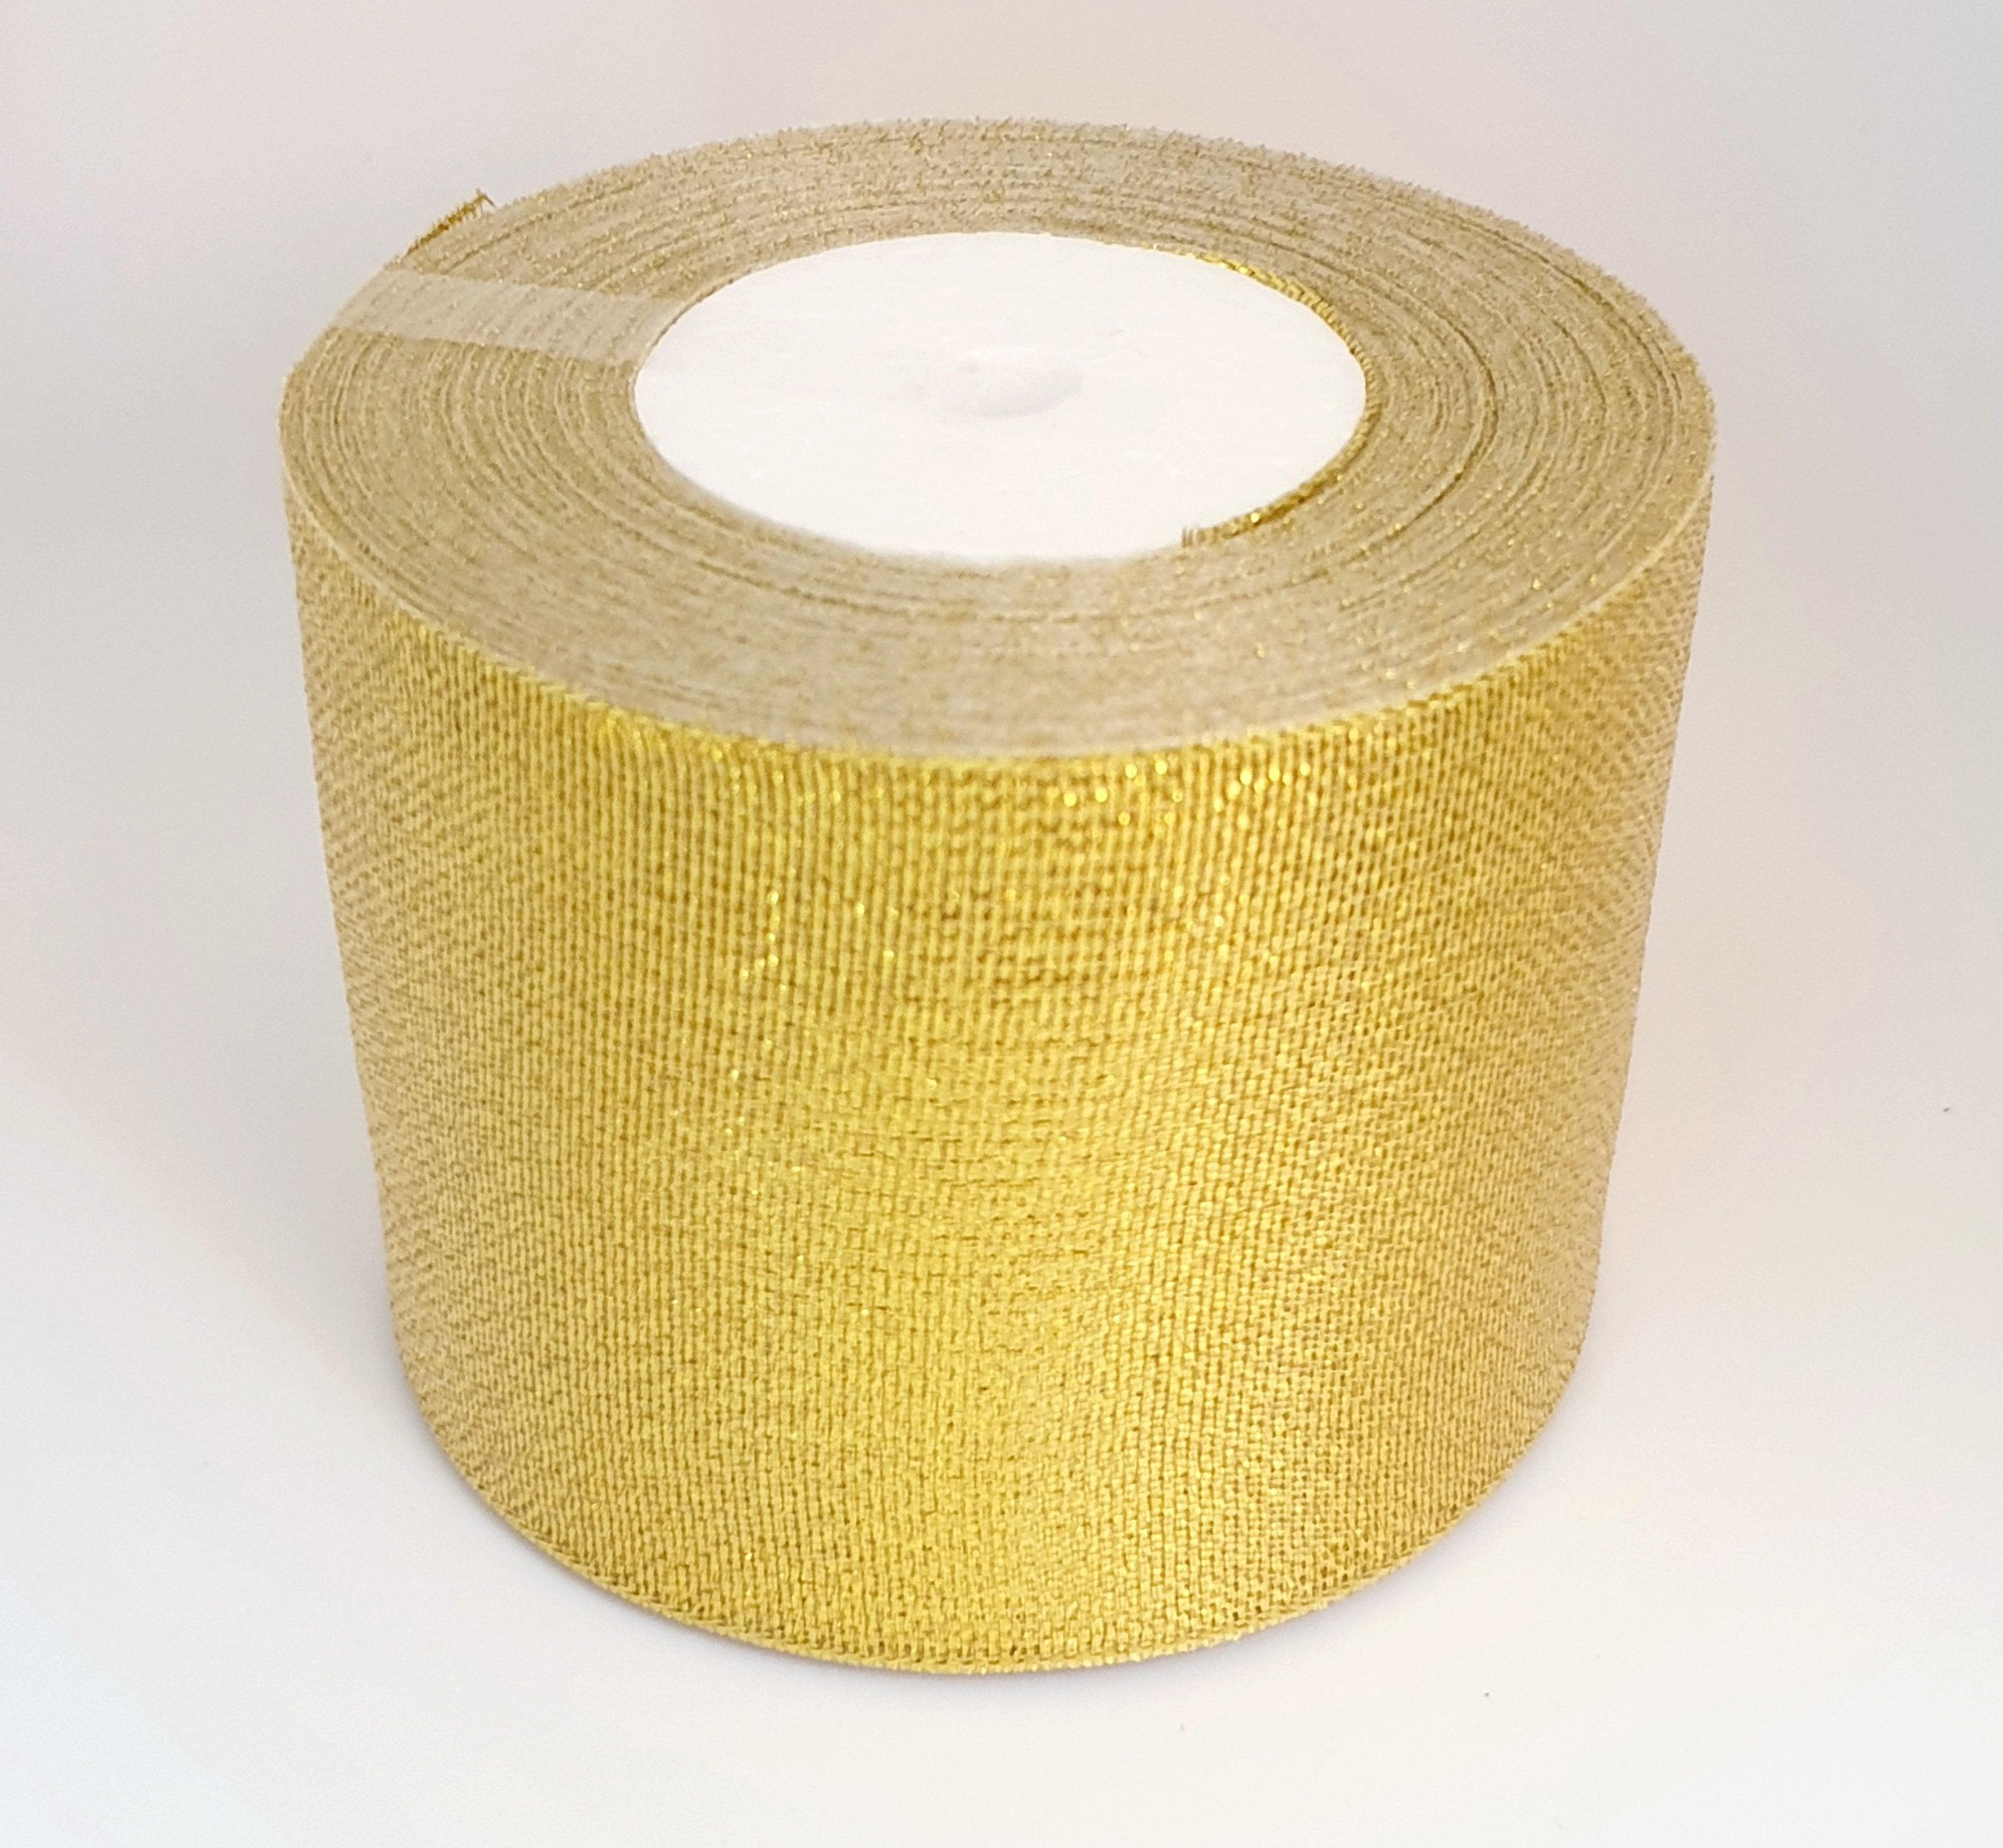 MajorCrafts 10cm wide 22metres Gold Shimmer Glitter Single Sided Sheer Organza Fabric Ribbon Roll